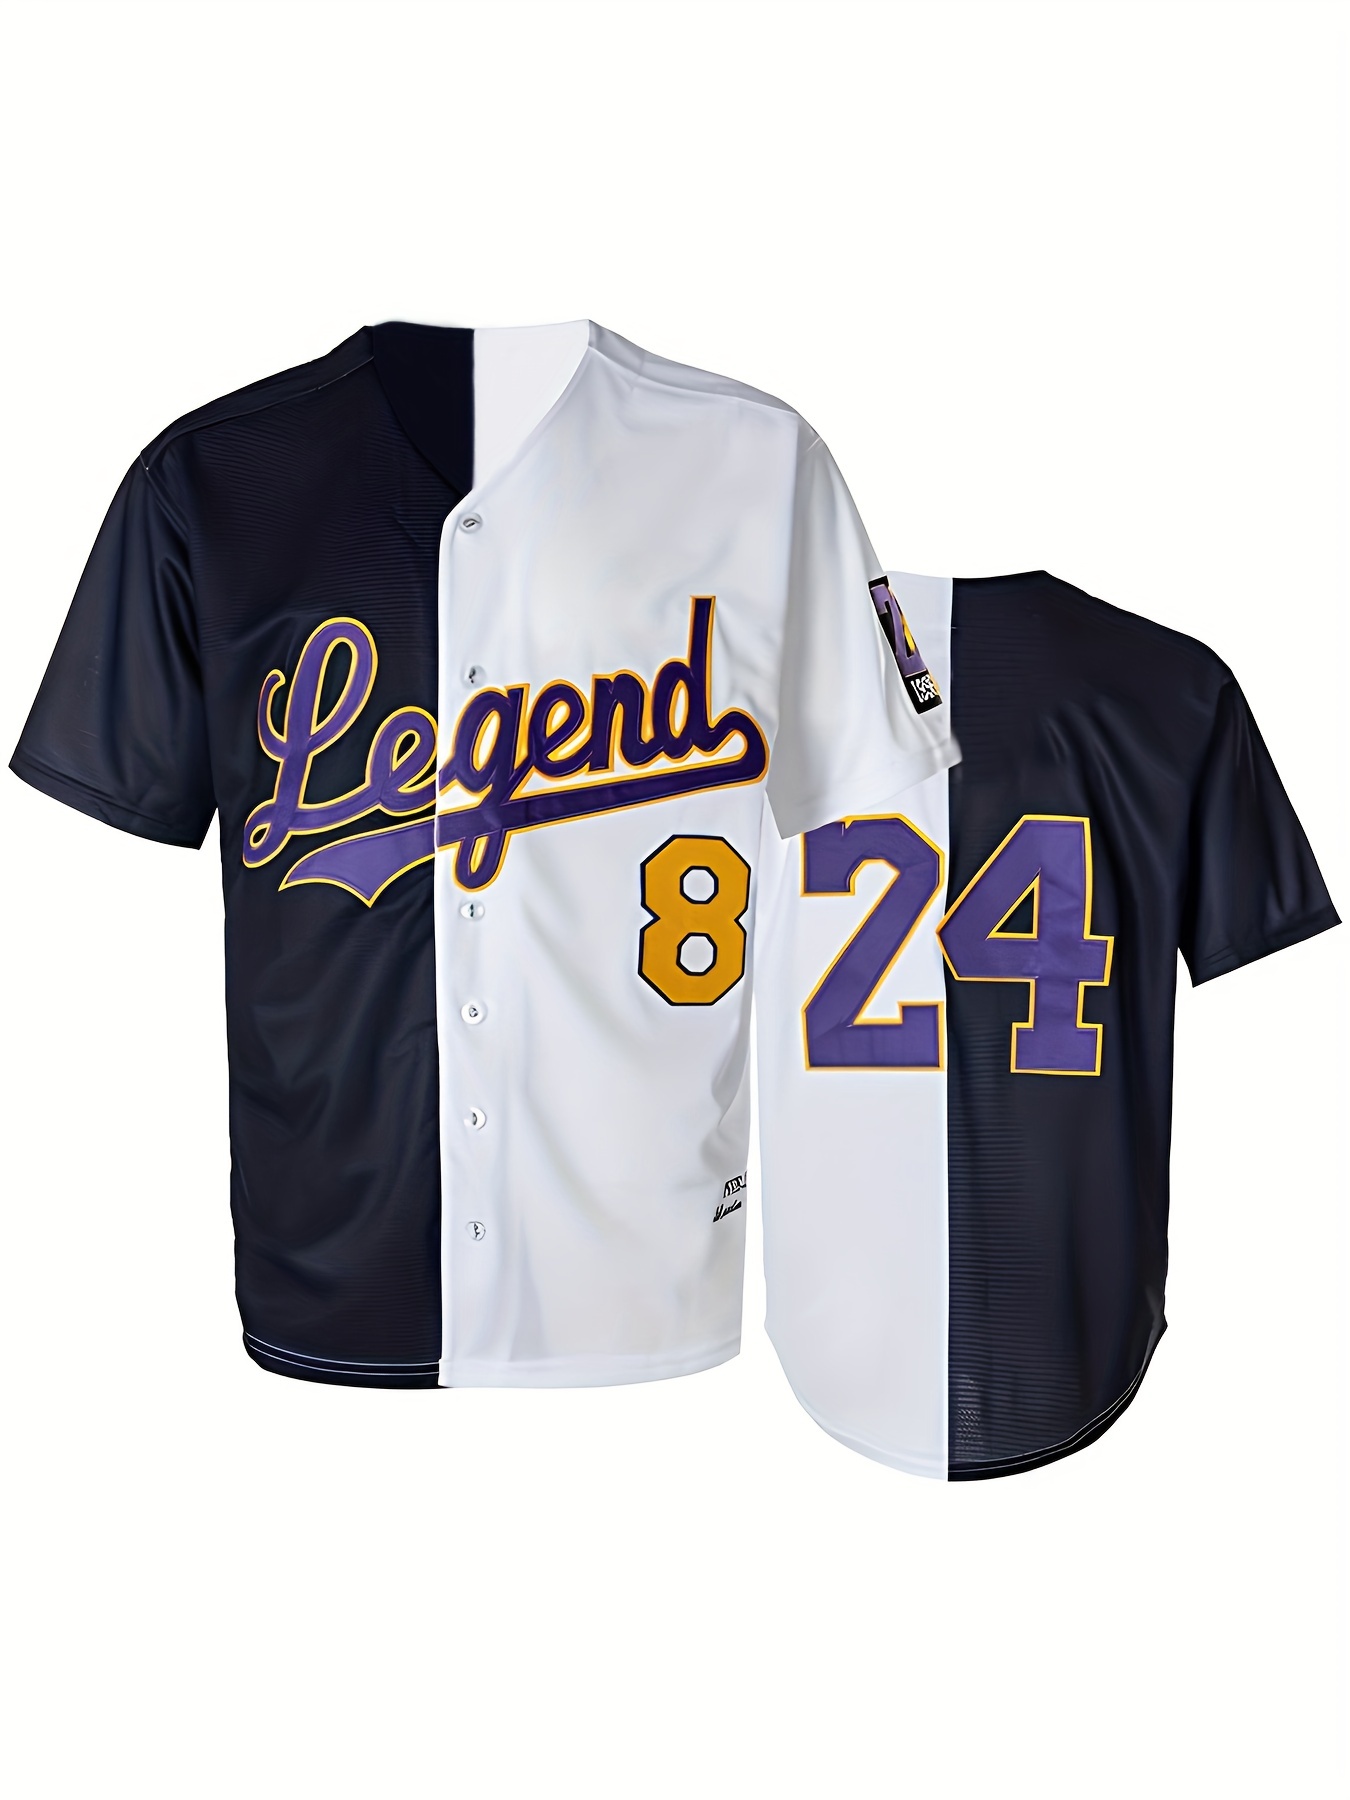 Mens Retro Memorial Baseball Jersey 8 24 Athletic Sport Shirt For Party  Costume Gift, Discounts For Everyone